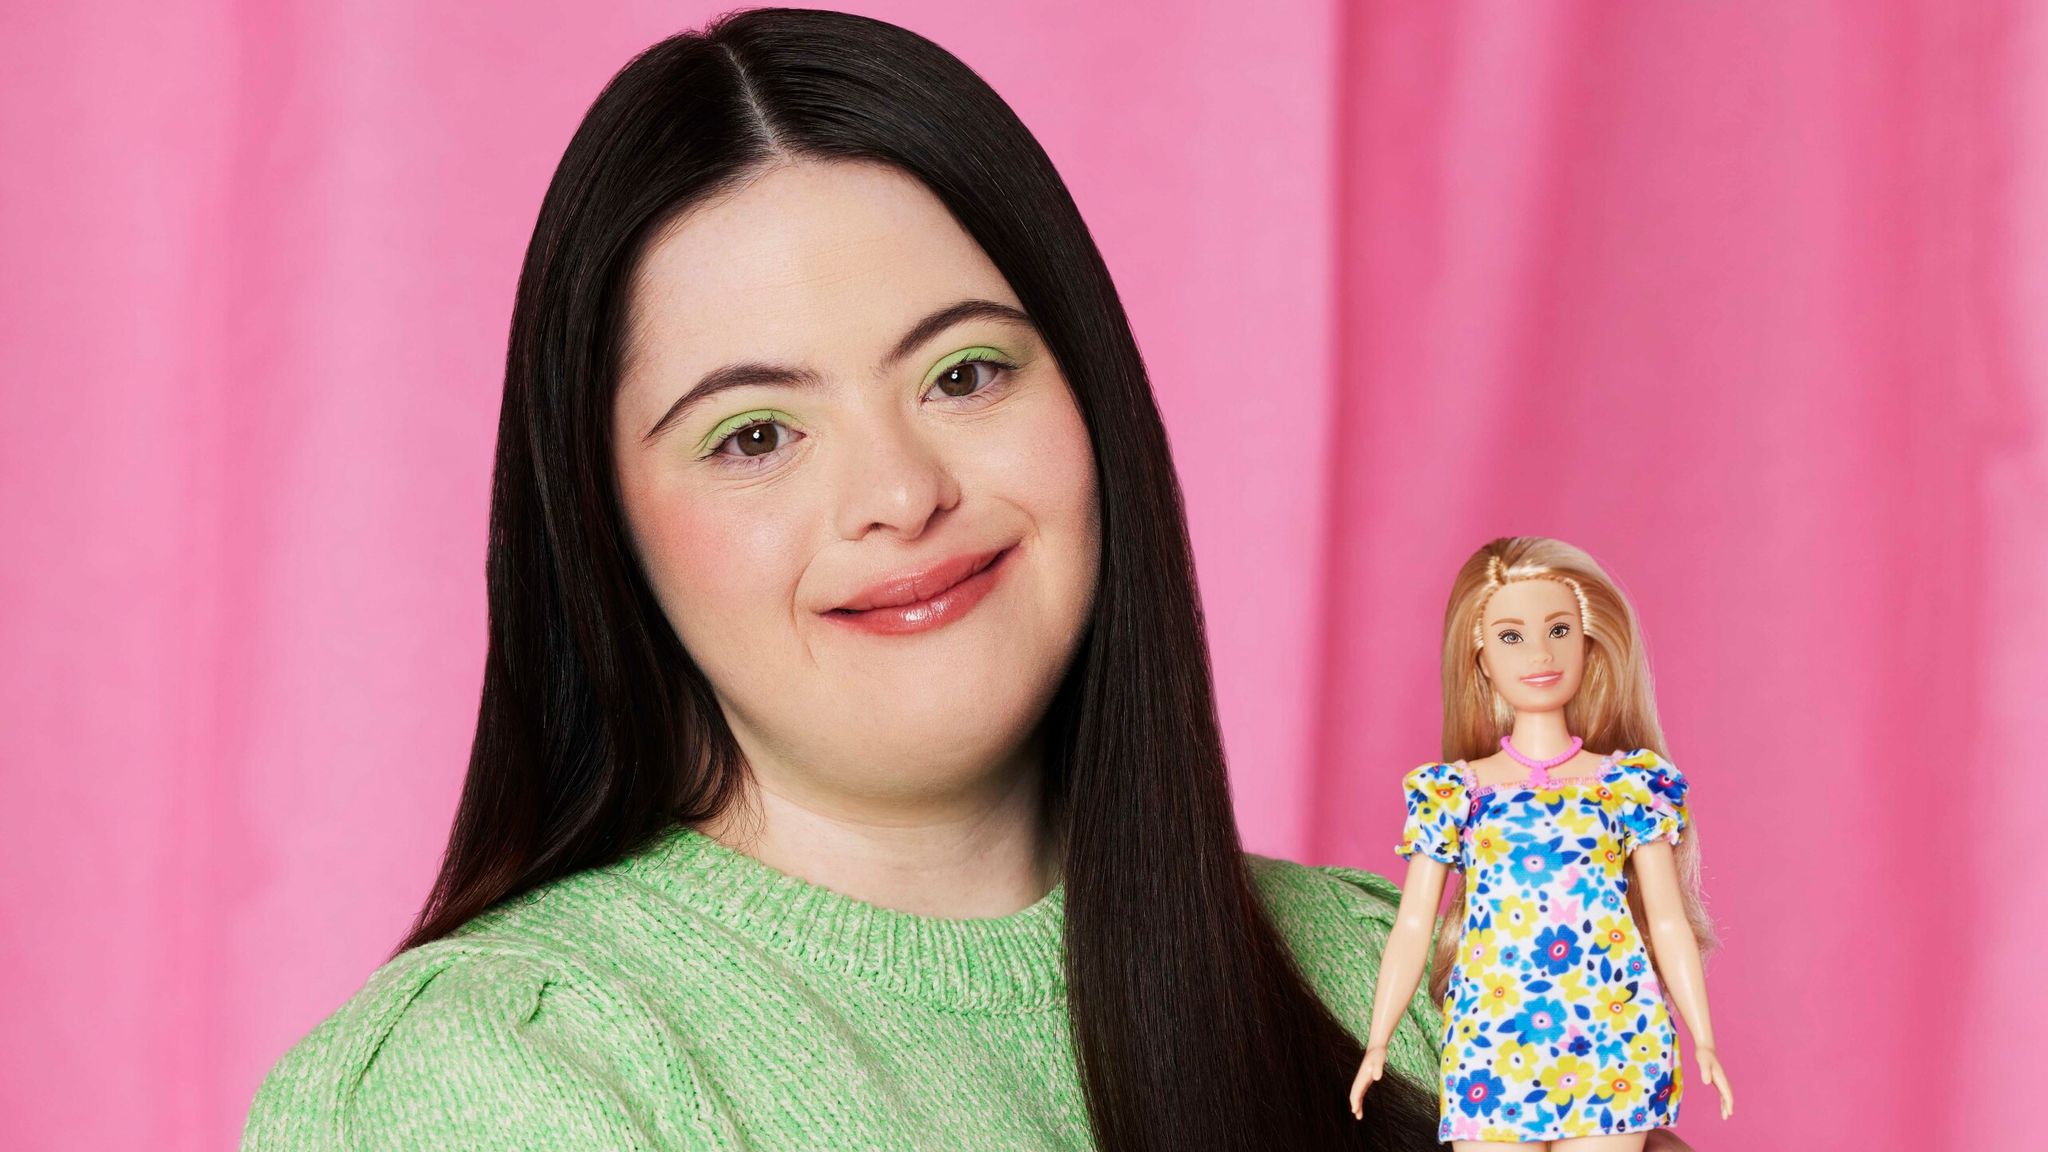 Barbie With Down Syndrome Now Available After Criticism For Lack Of Diversity